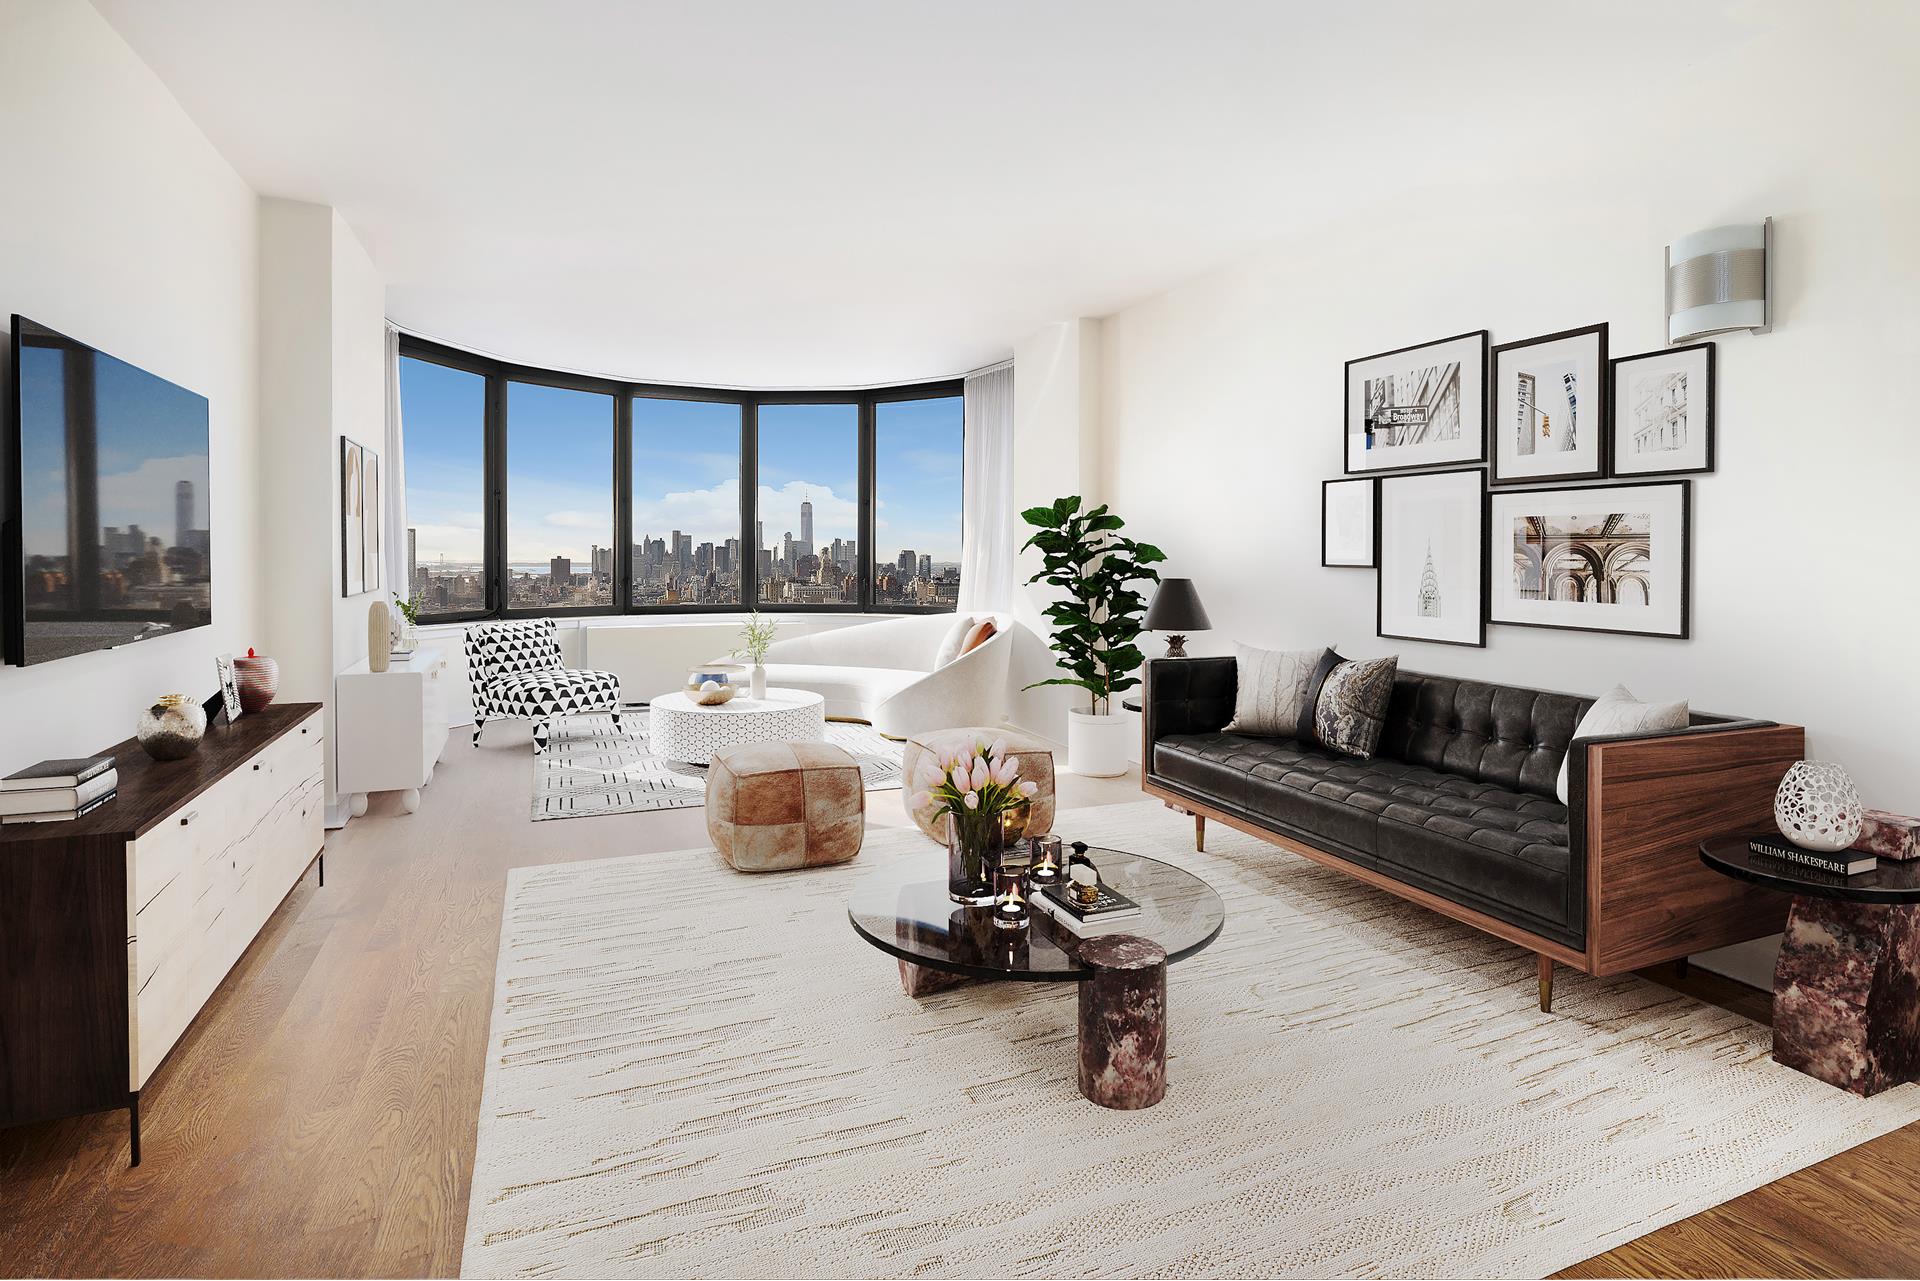 330 East 38th Street 50Aq, Murray Hill, Midtown East, NYC - 3 Bedrooms  
3 Bathrooms  
6 Rooms - 